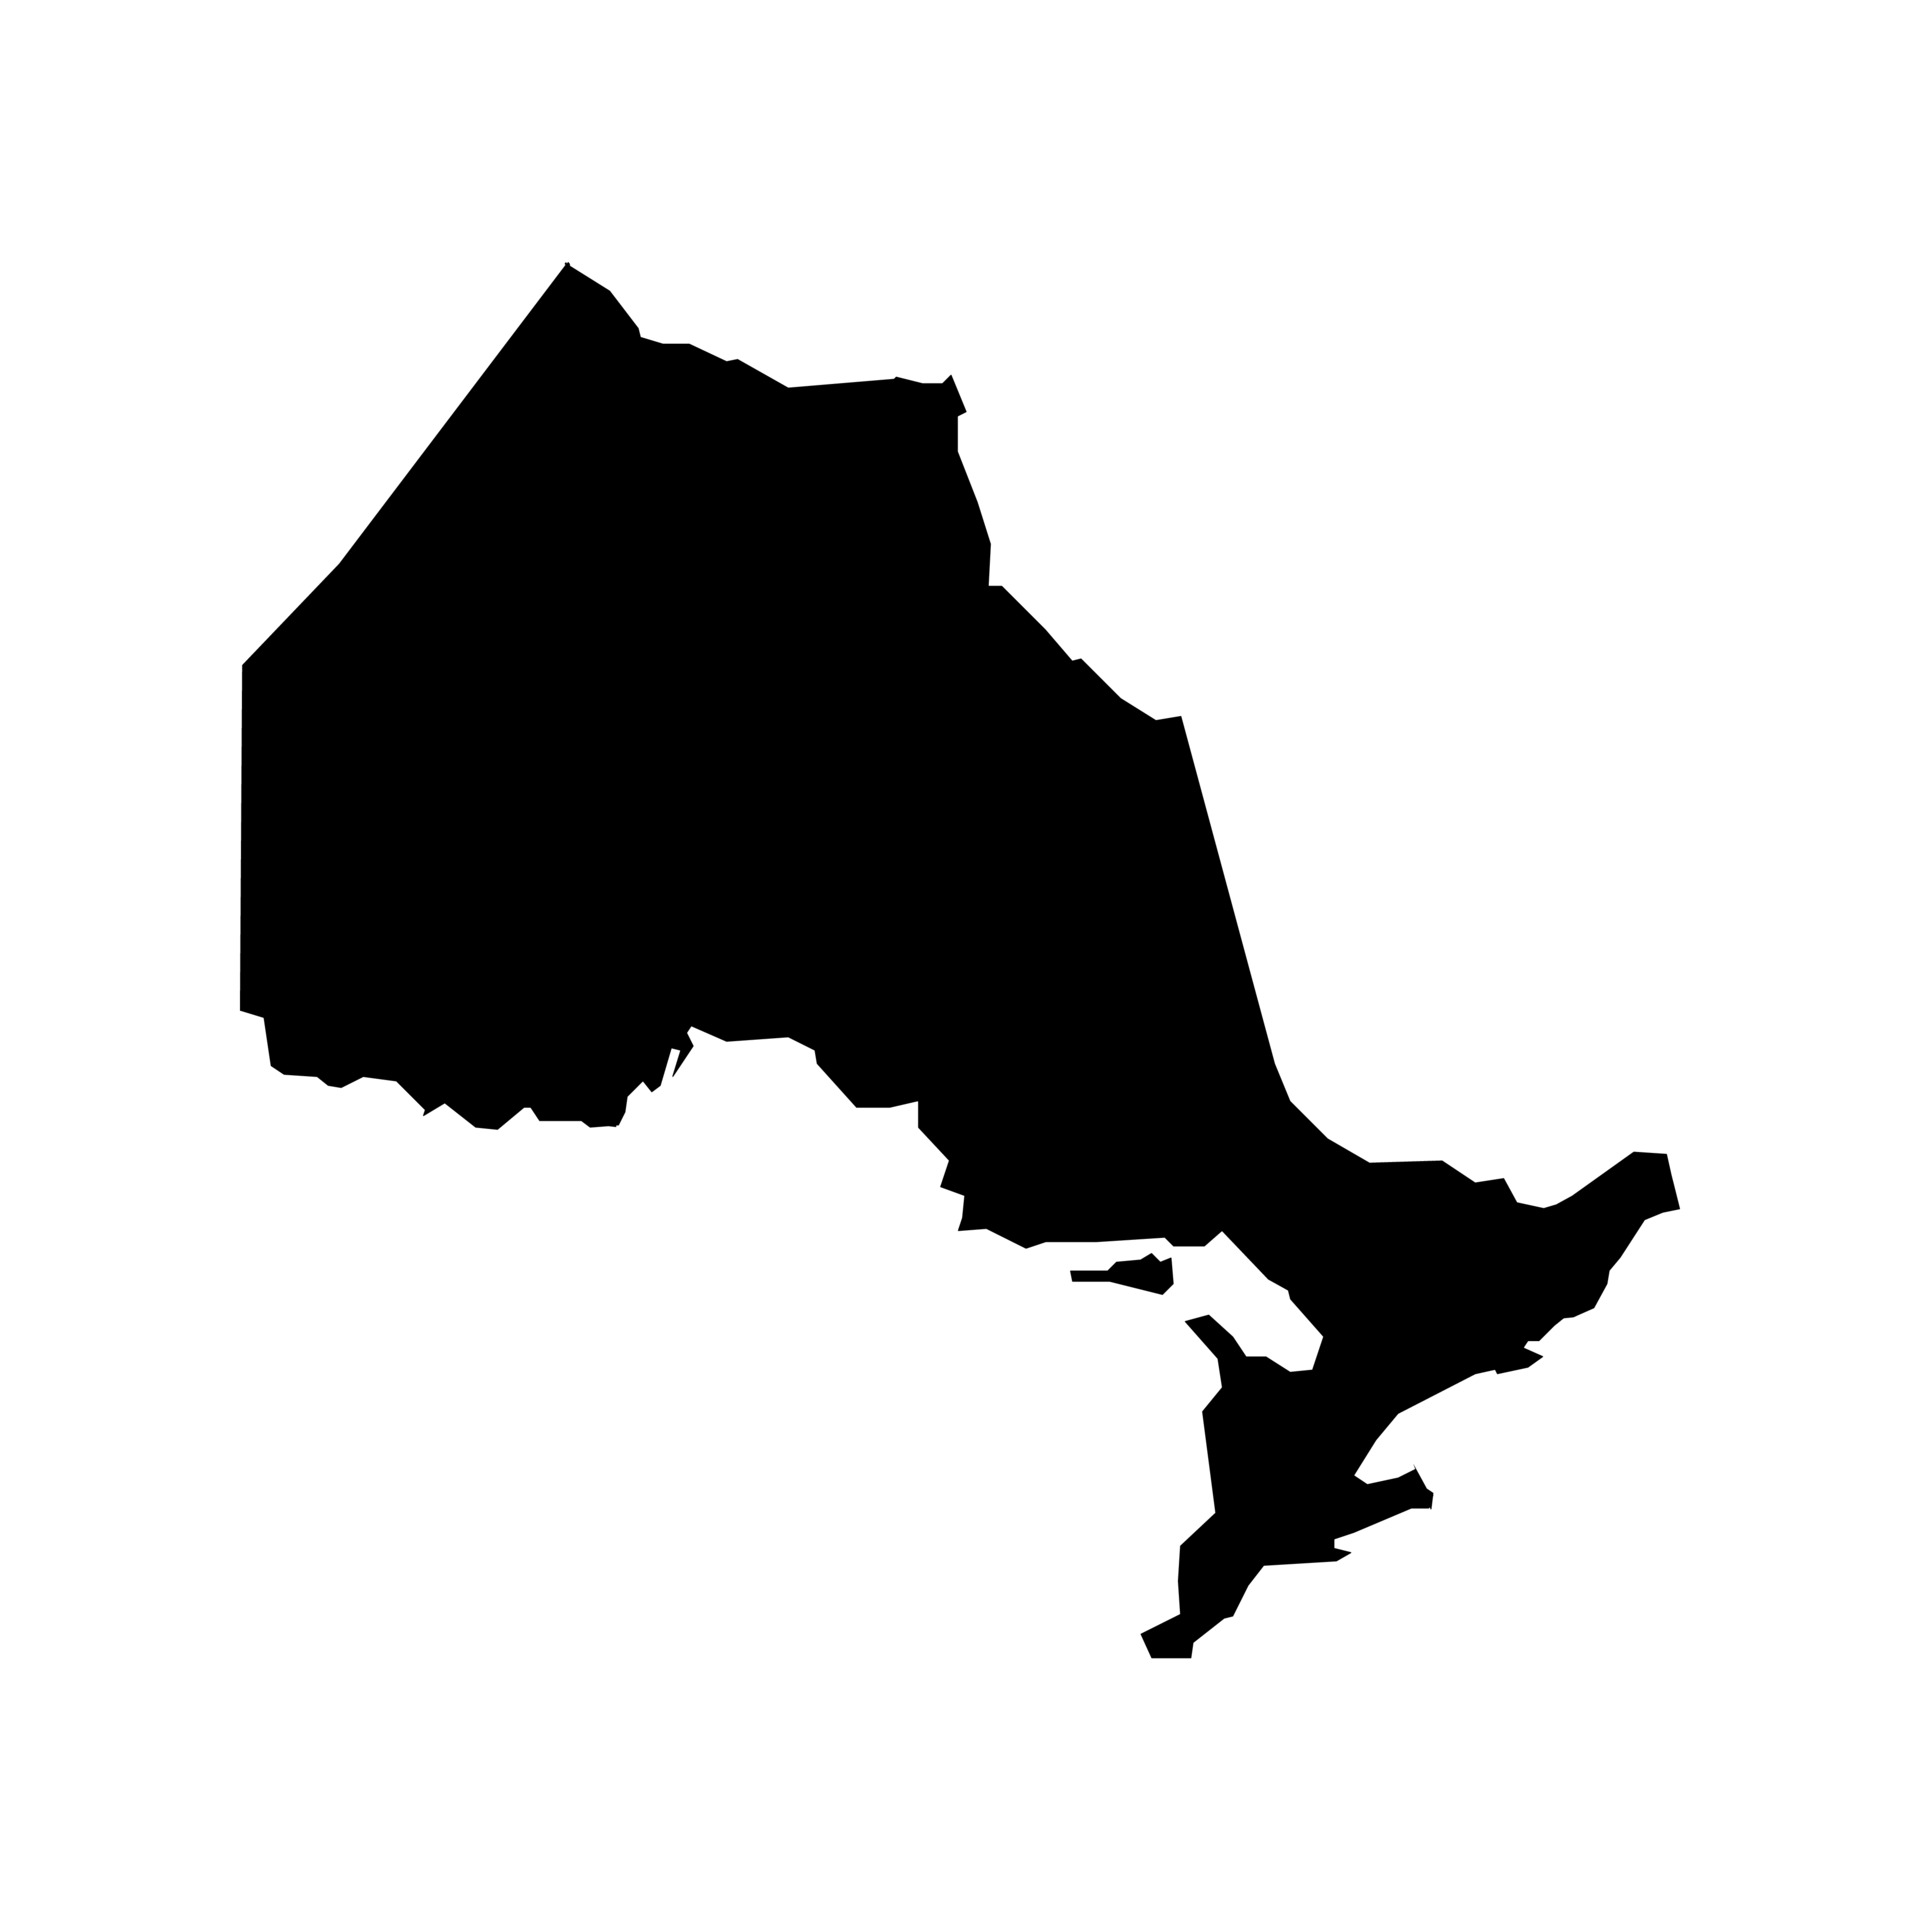 A black silhouette of the map of canada